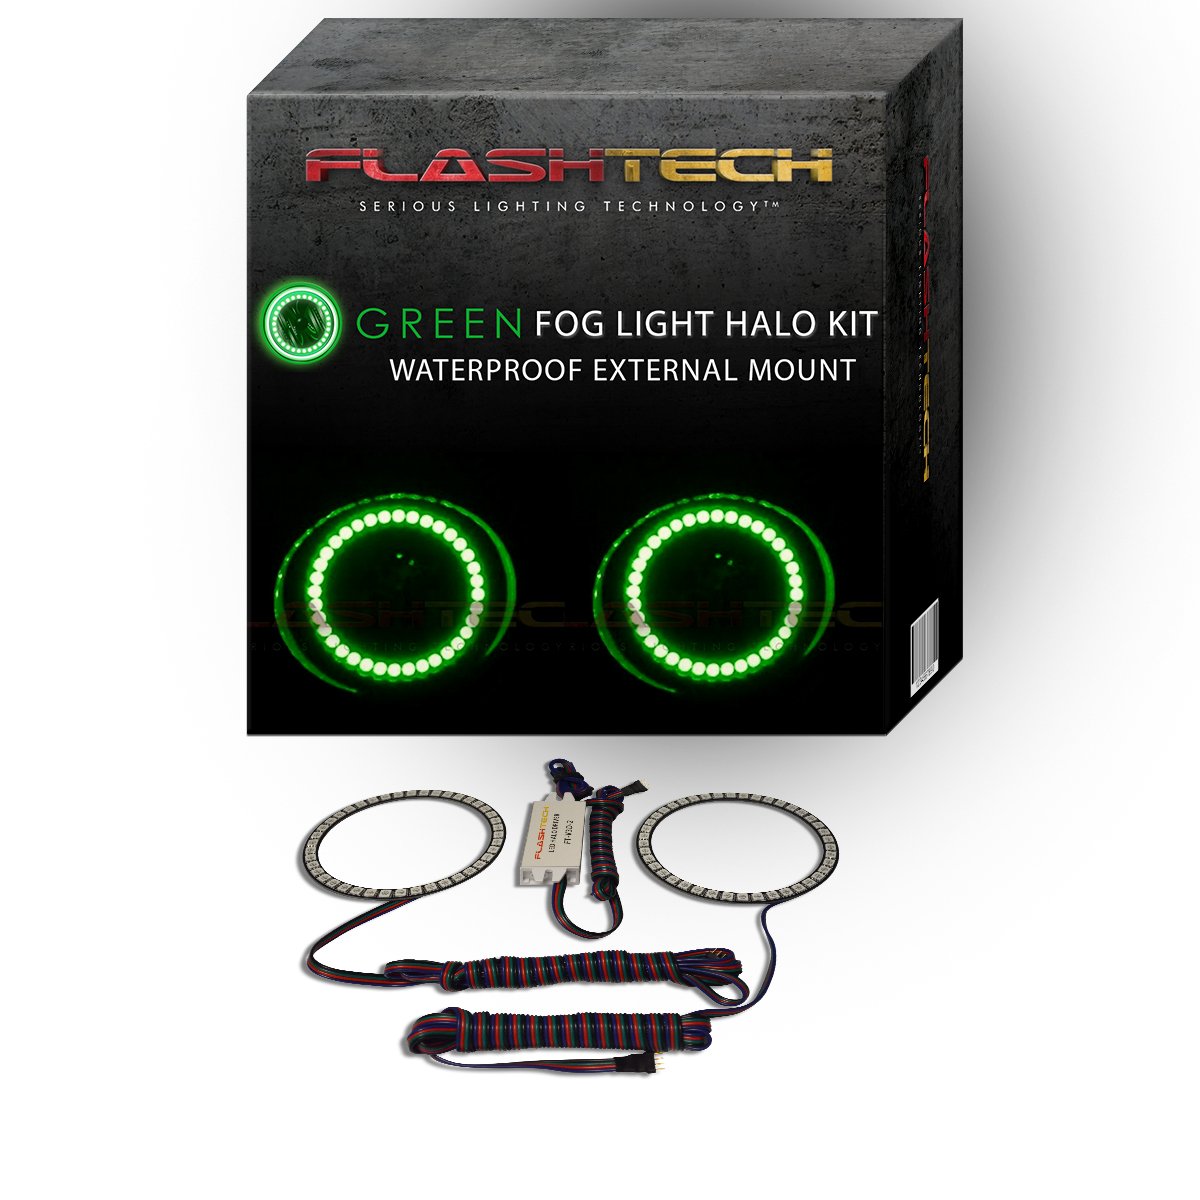 Chrysler-Pacifica-2006, 2007, 2008, 2009-LED-Halo-Fog Lights-Green-No Remote-CH-PF0609-GF-WPE